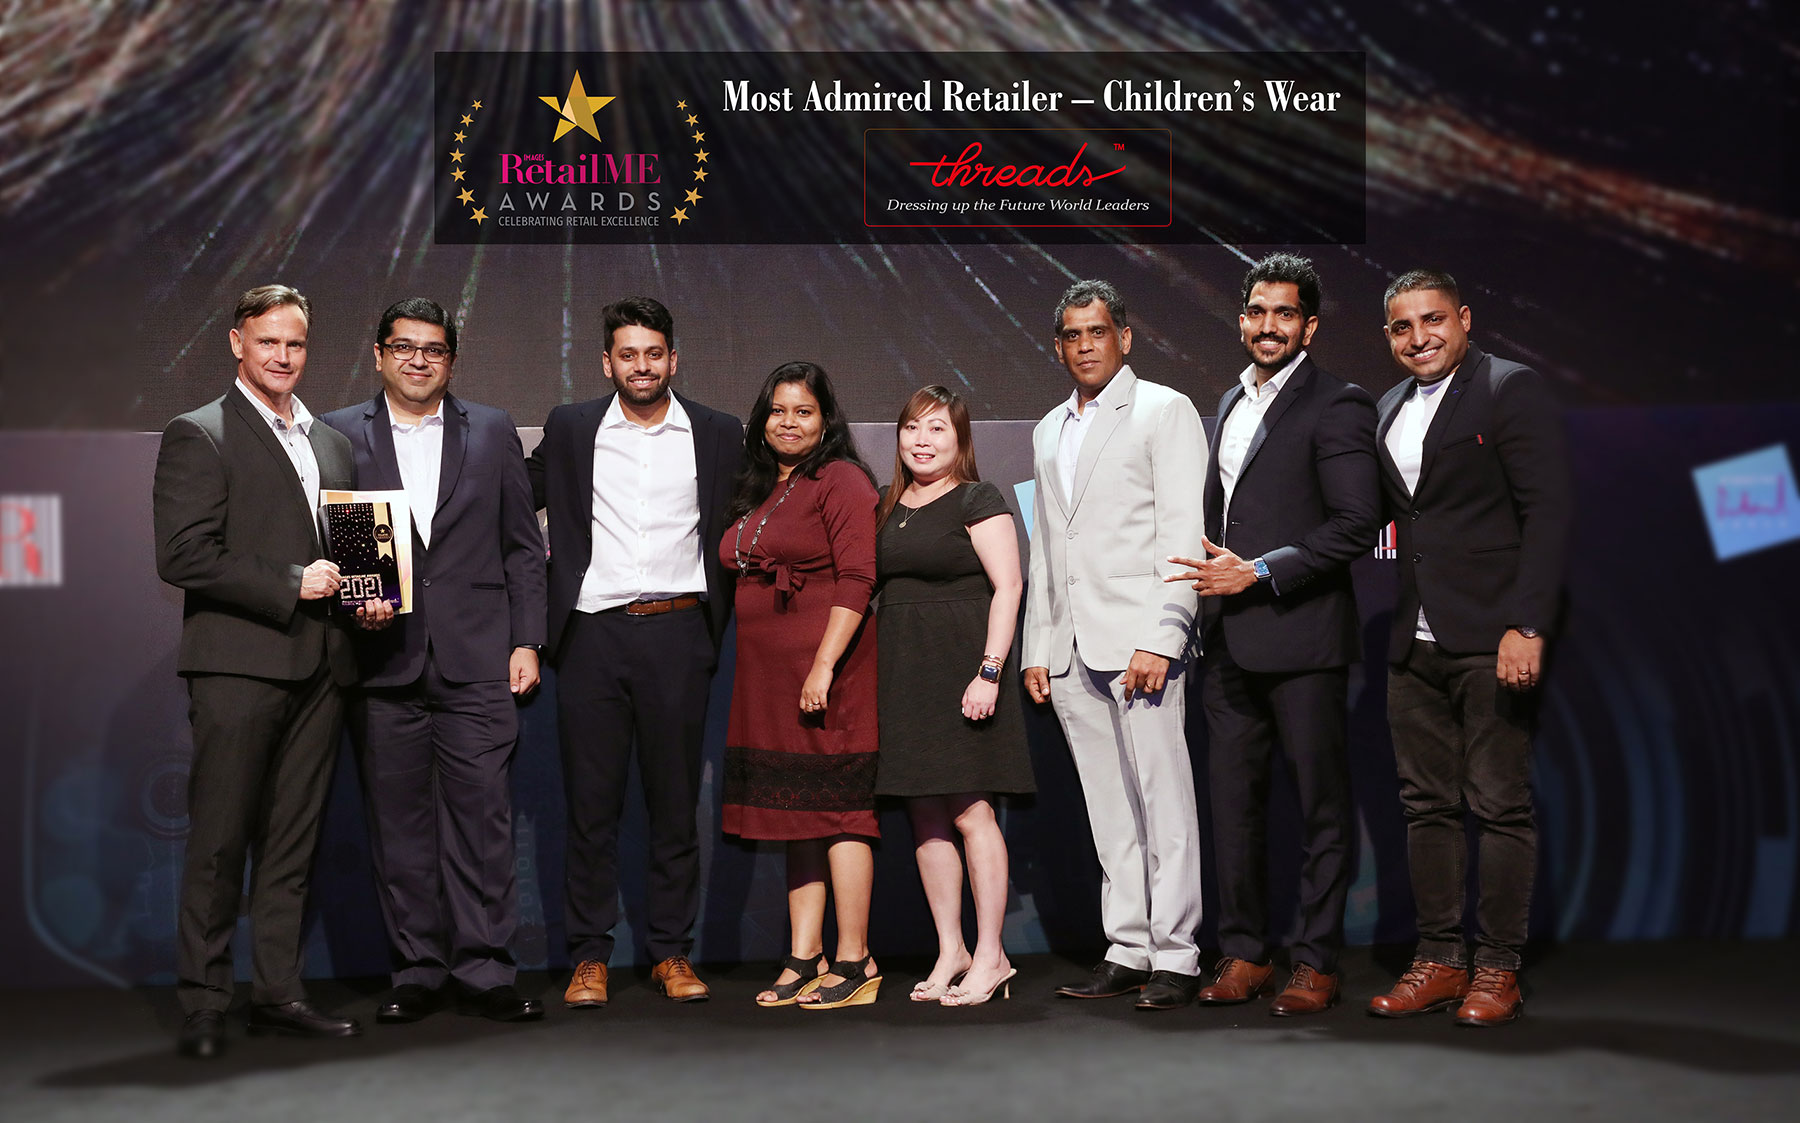 Threads awarded as The Most Admired Retailer of the year – Children’s Wear